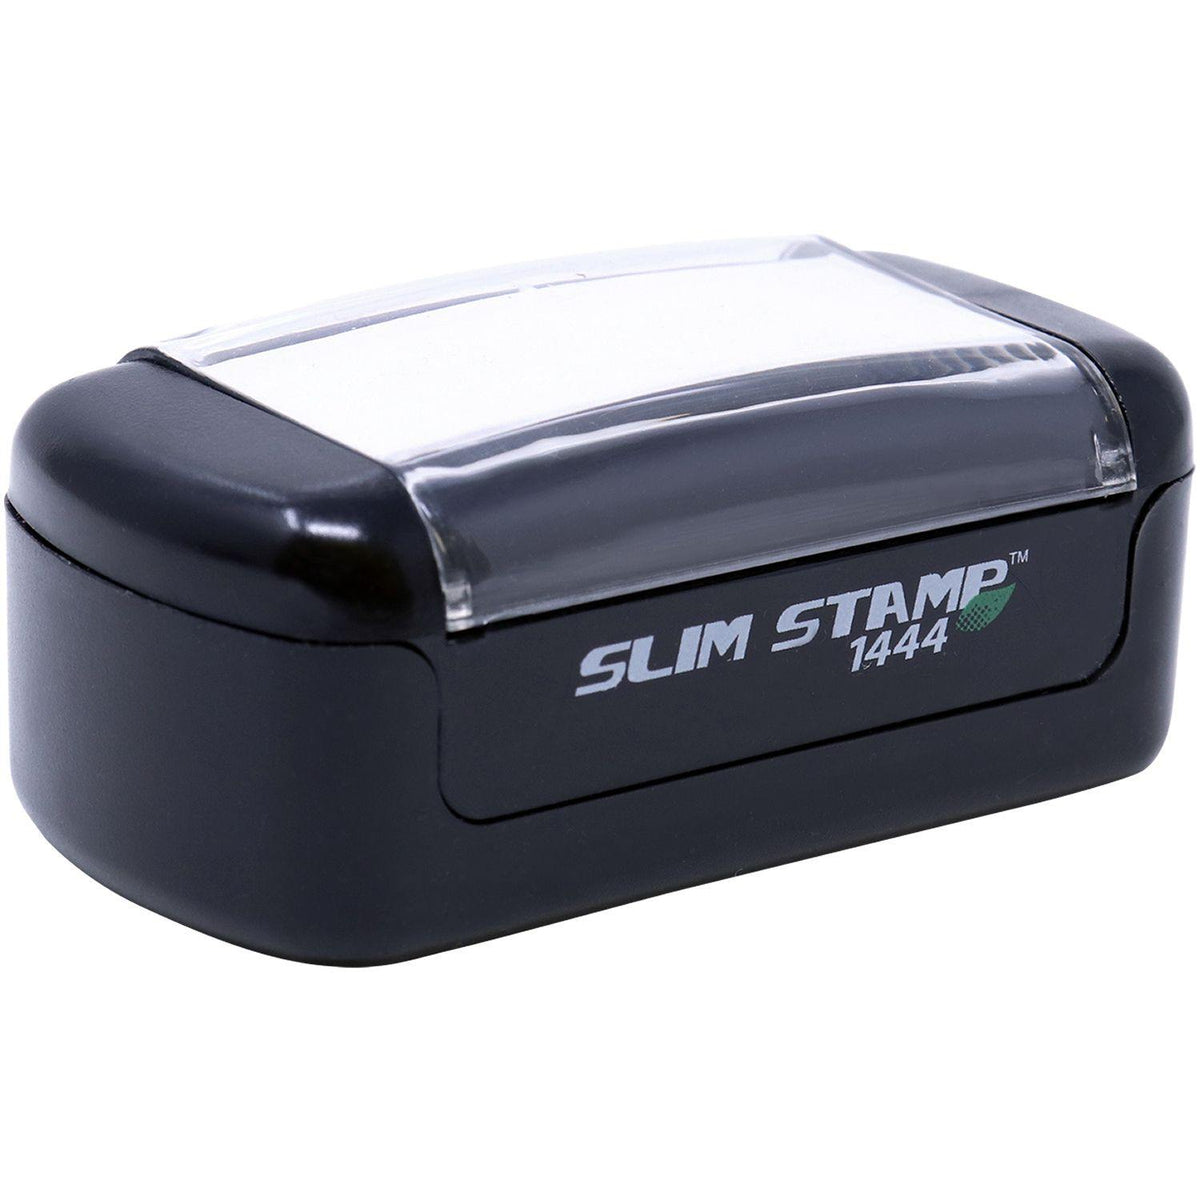 Alt View of Slim Pre-Inked Great Job Stamp Mount Angle